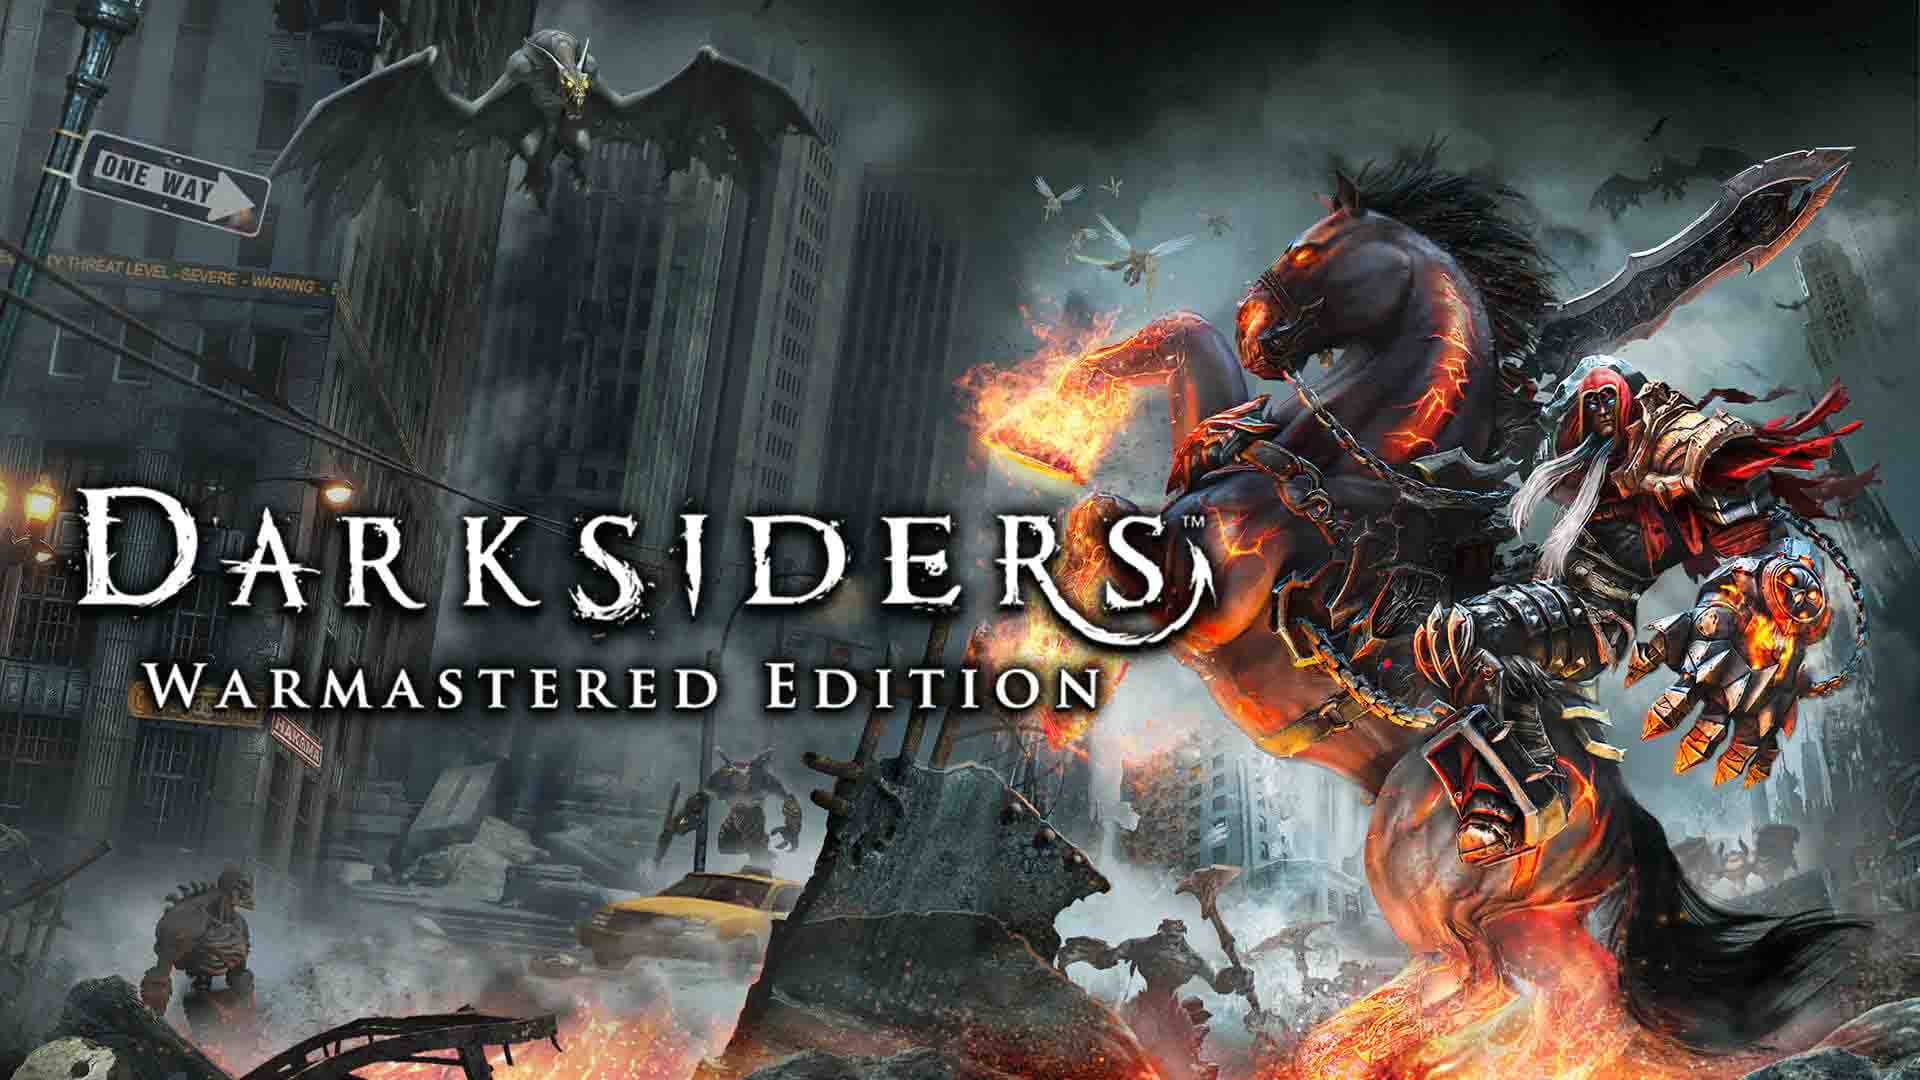 Darksiders Warmastered Edition System Requirements for PC Games minimum, recommended specifications for Windows, CPU, OS, RAM Memory, Storage, and GPU.